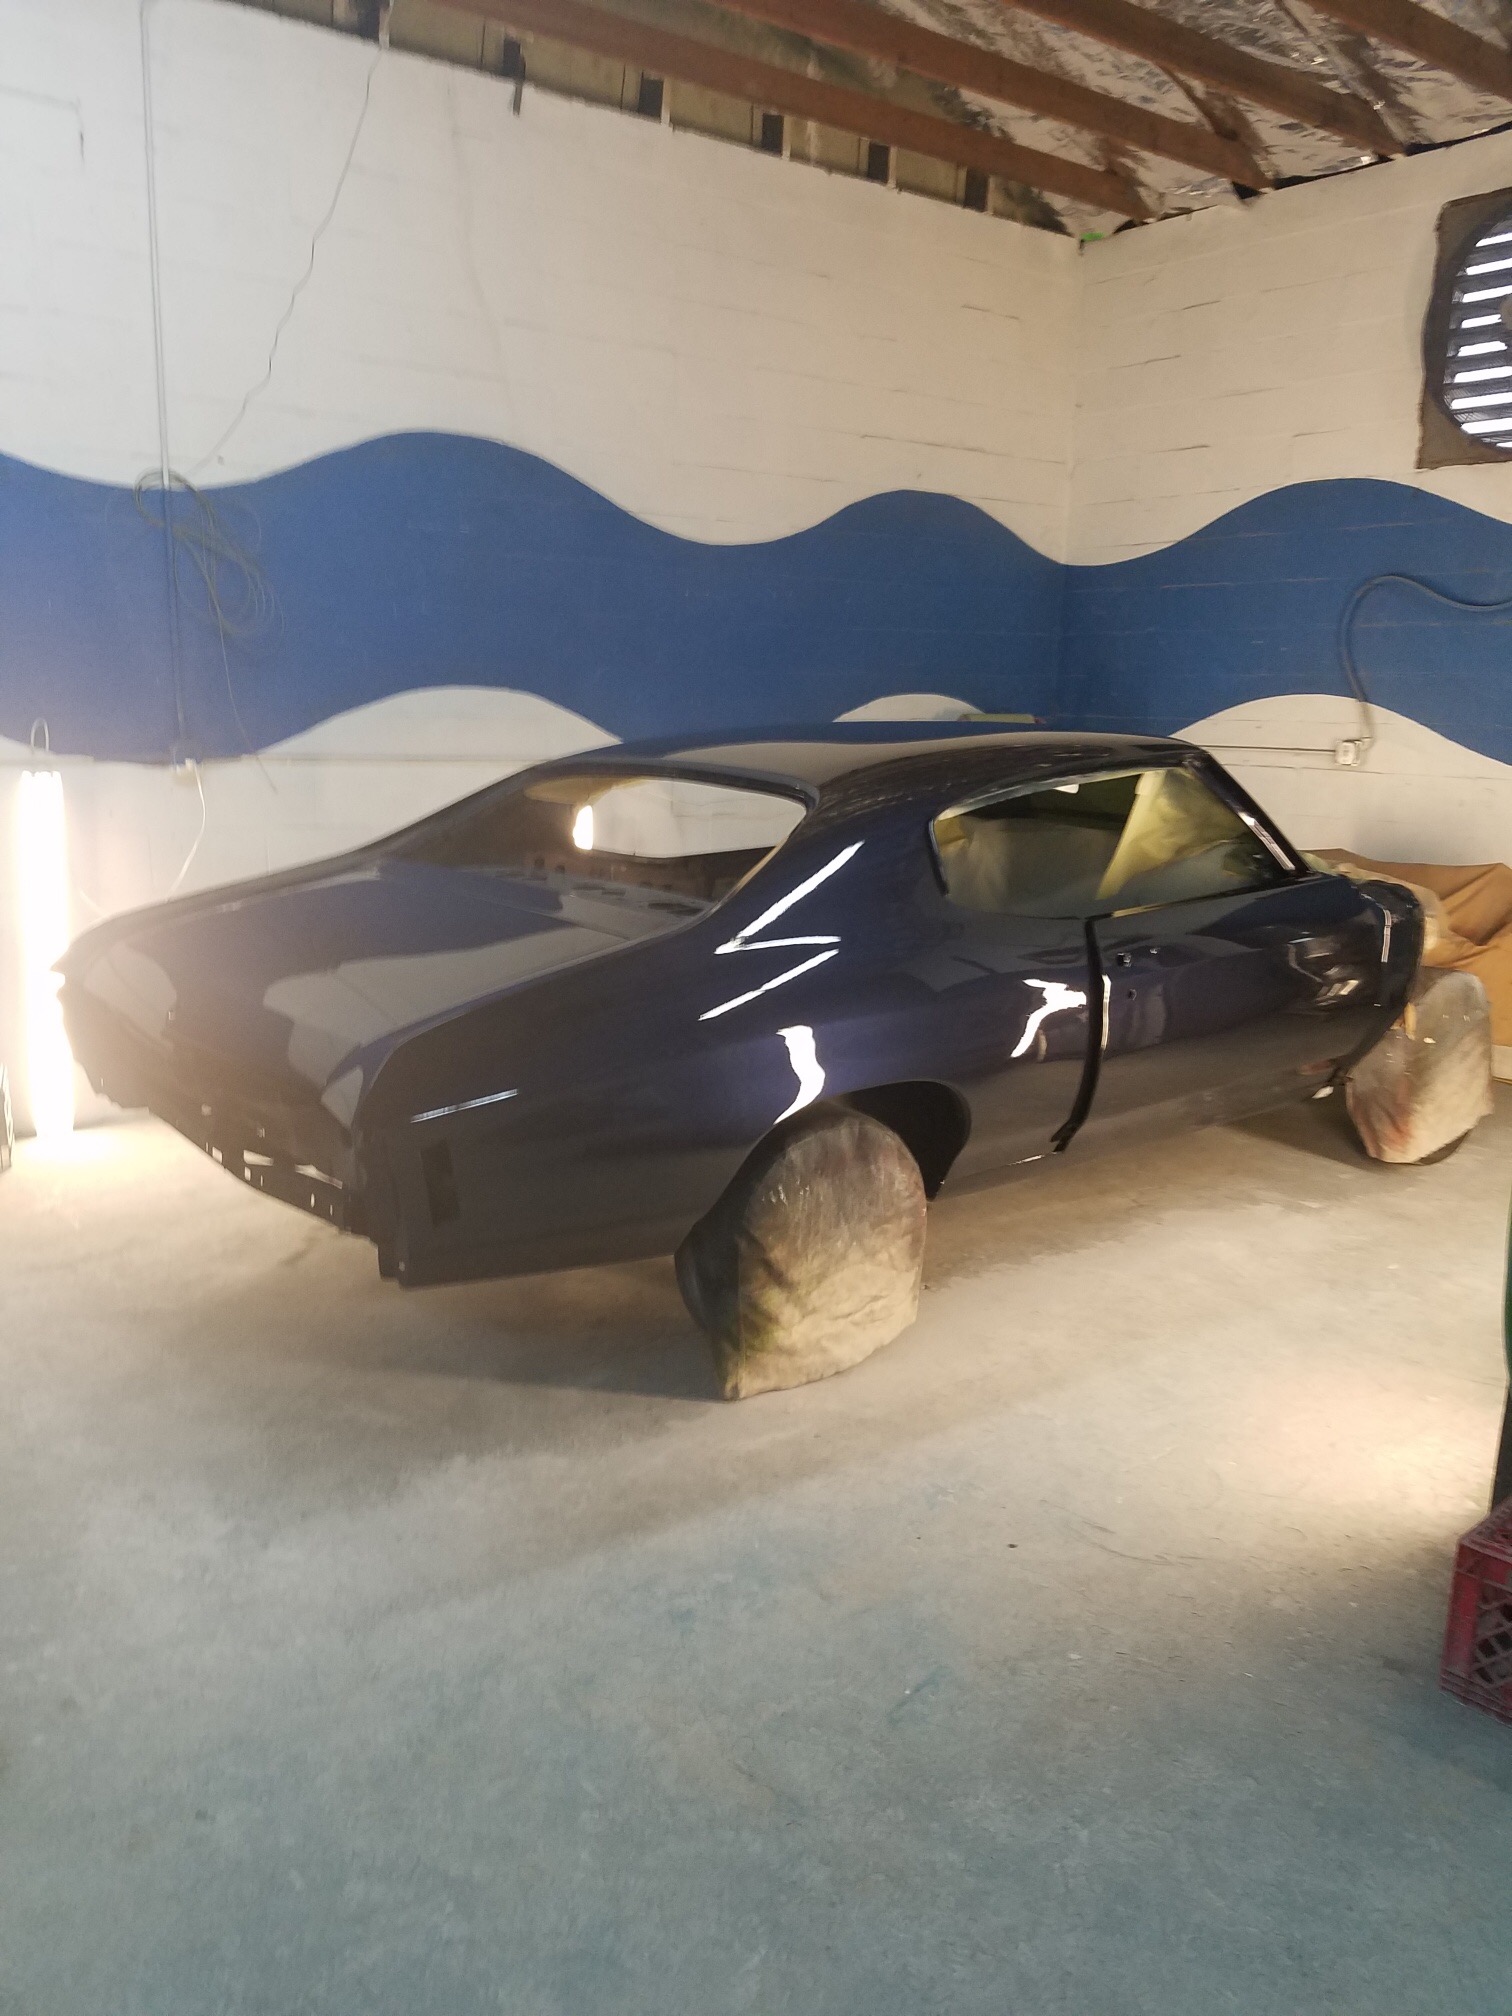 Used 1971 Chevrolet Chevelle -FRAME UP RESTORED-BIG BLOCK 454-NEW PAINT/INTERIOR-FROM FLORIDA-MUSCLE- | Mundelein, IL